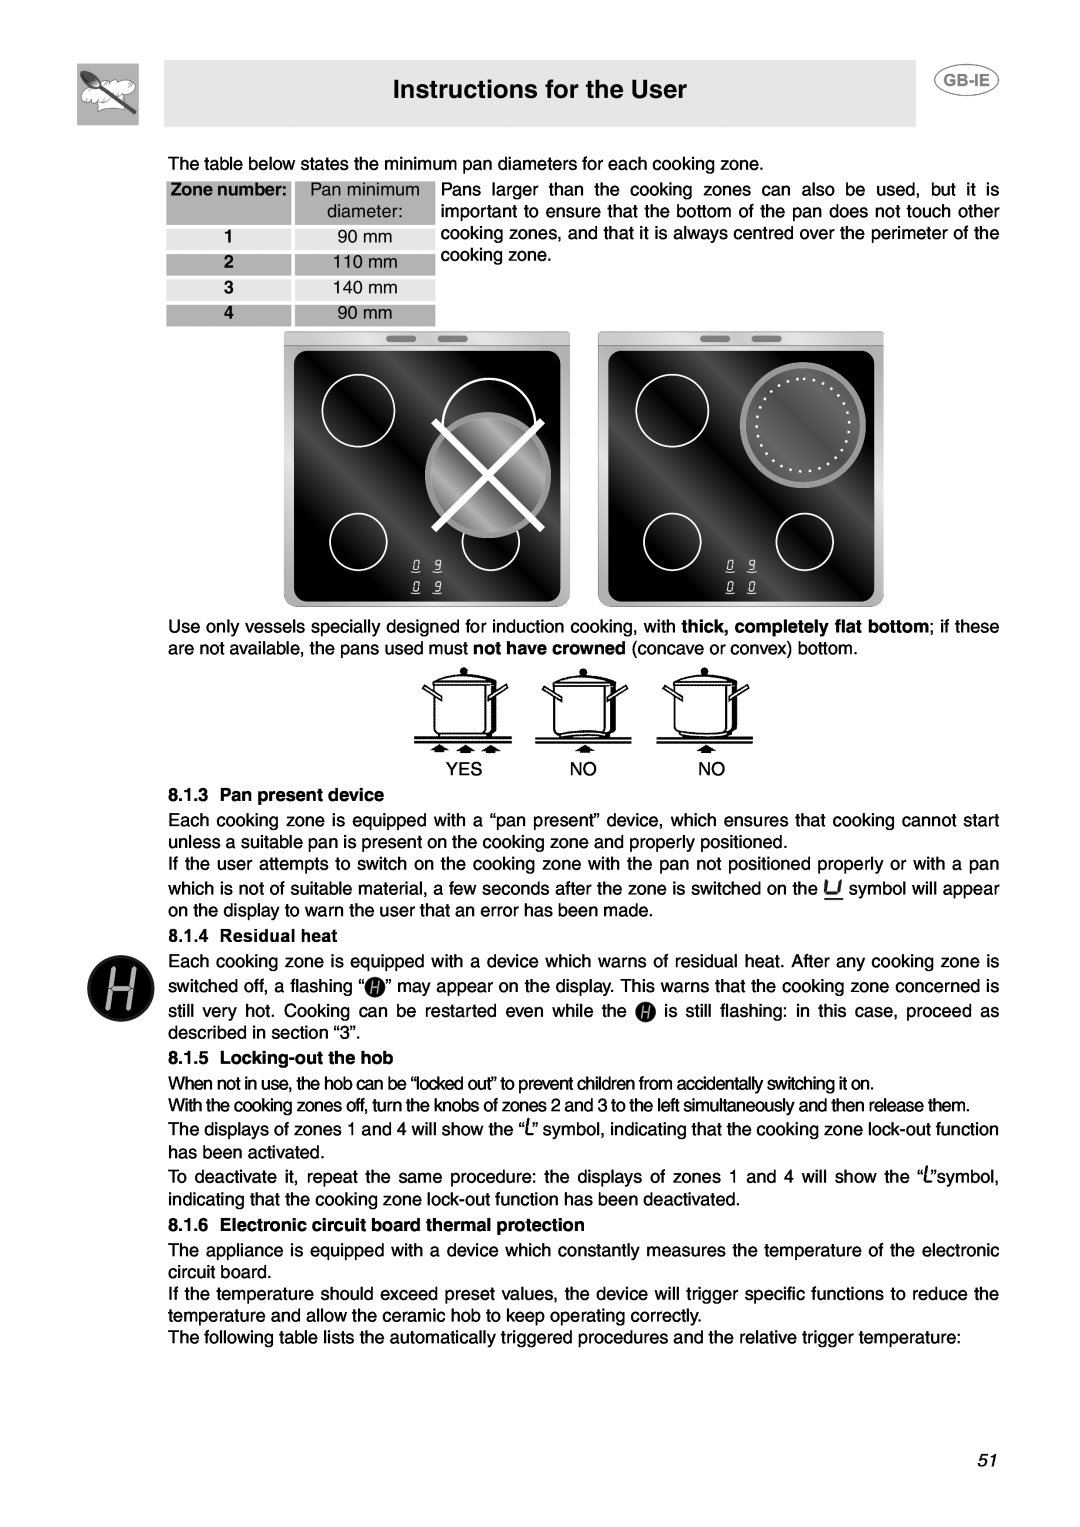 Smeg SCB64MPX6, SCB64MPX5 Instructions for the User, Zone number, Pan present device, Residual heat, Locking-out the hob 